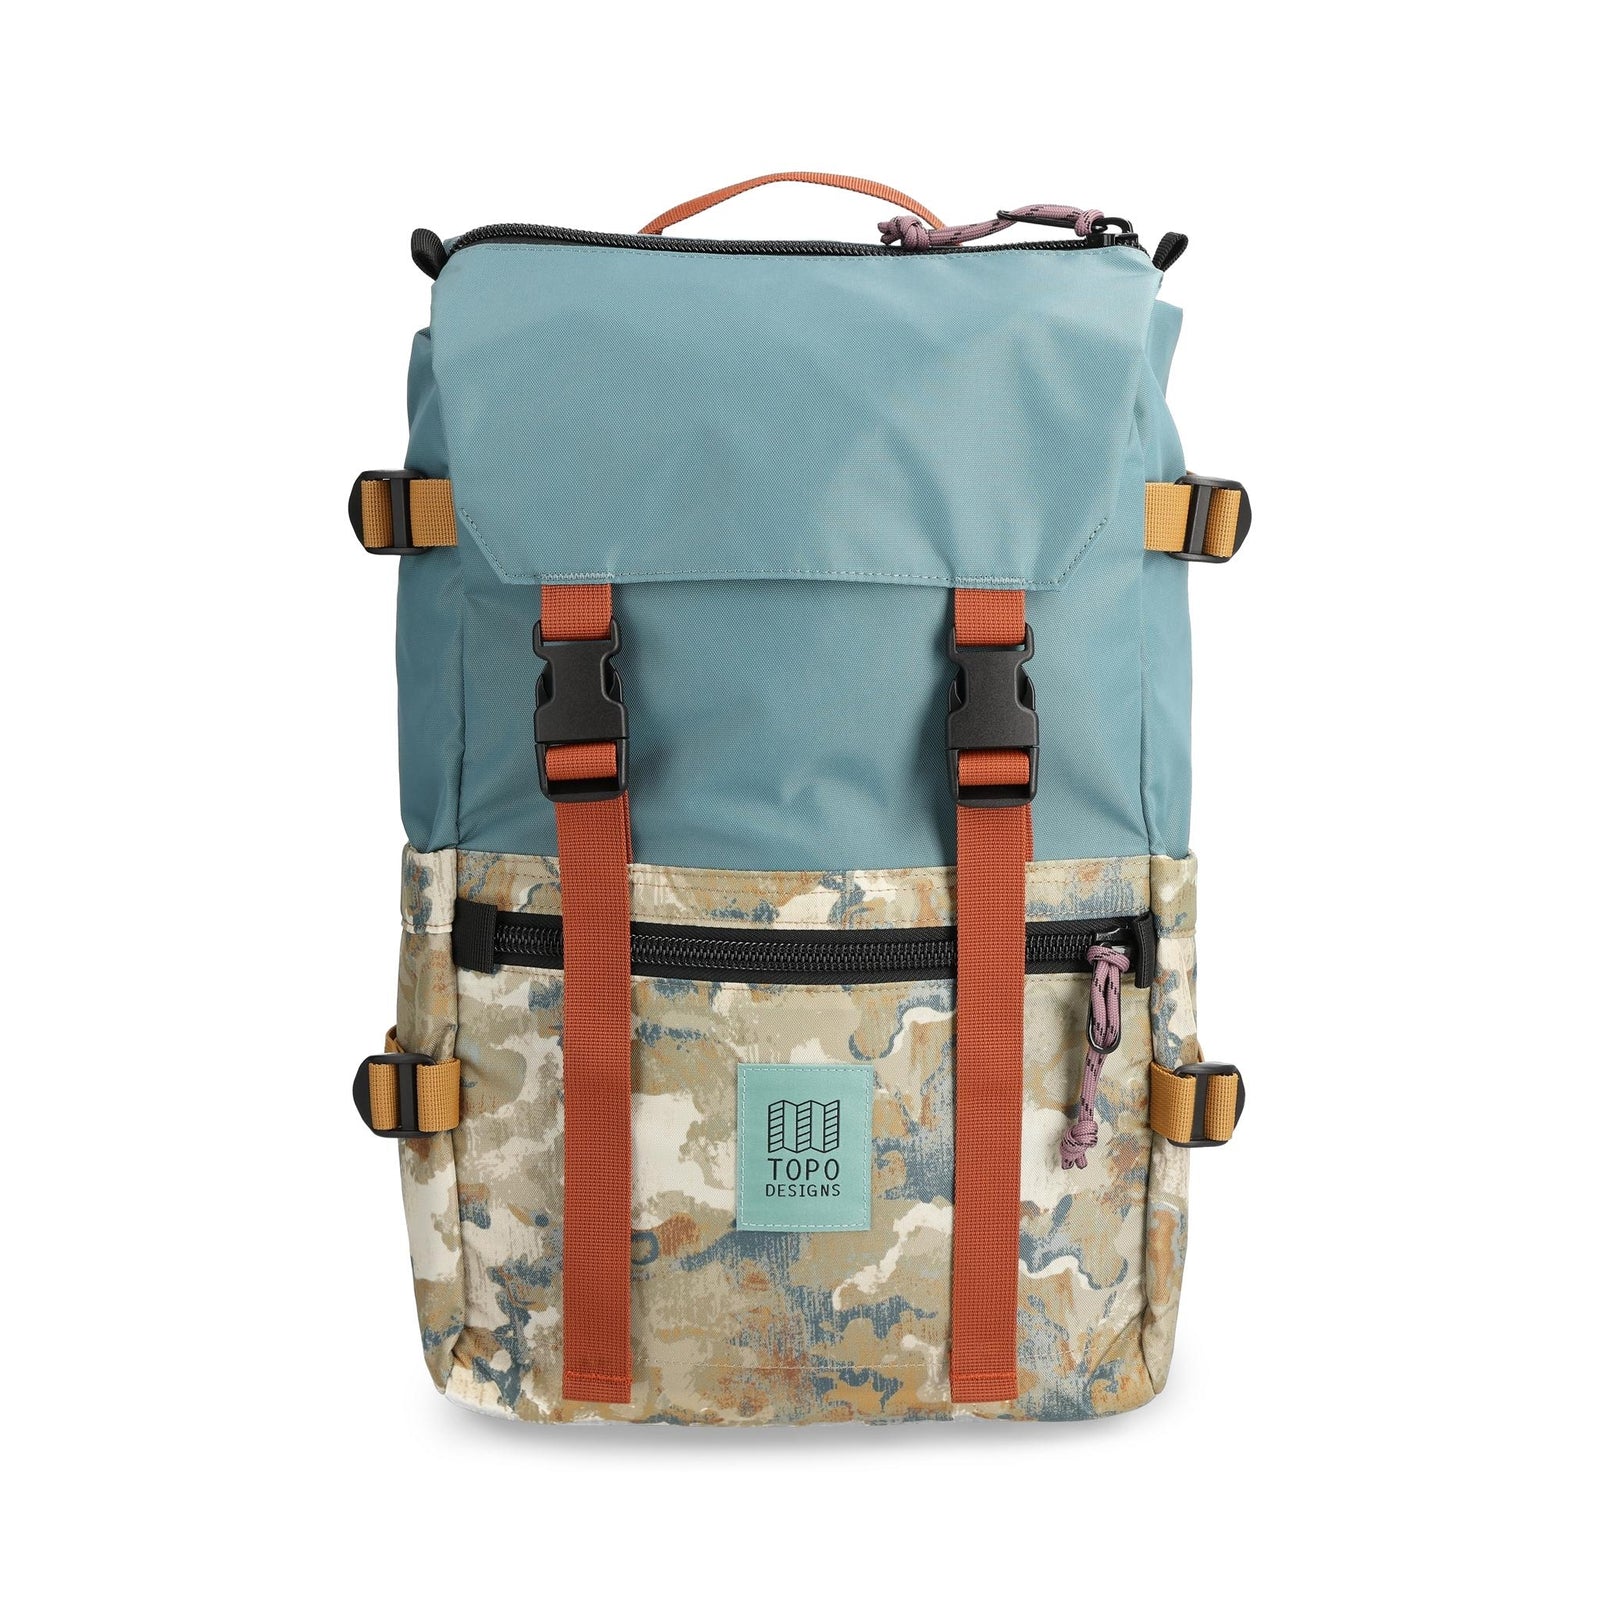 Front View of Topo Designs Rover Pack Classic in "Sea Pine / Blur Camo"